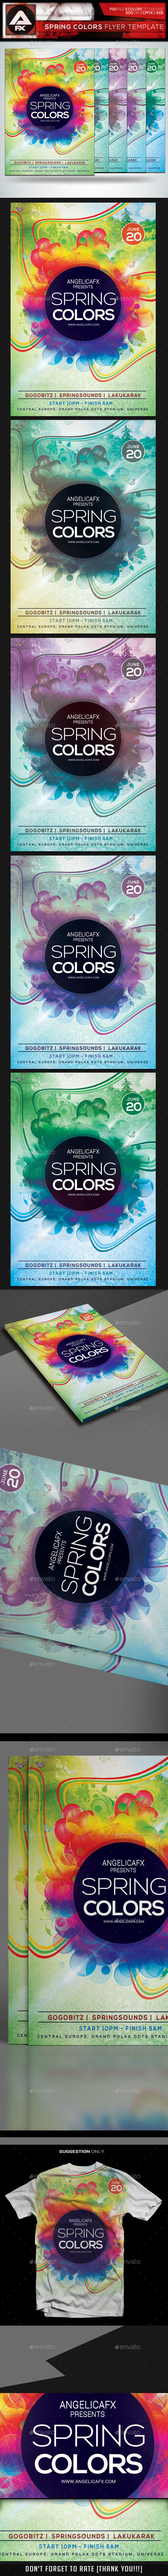 Spring Colors Flyer Template